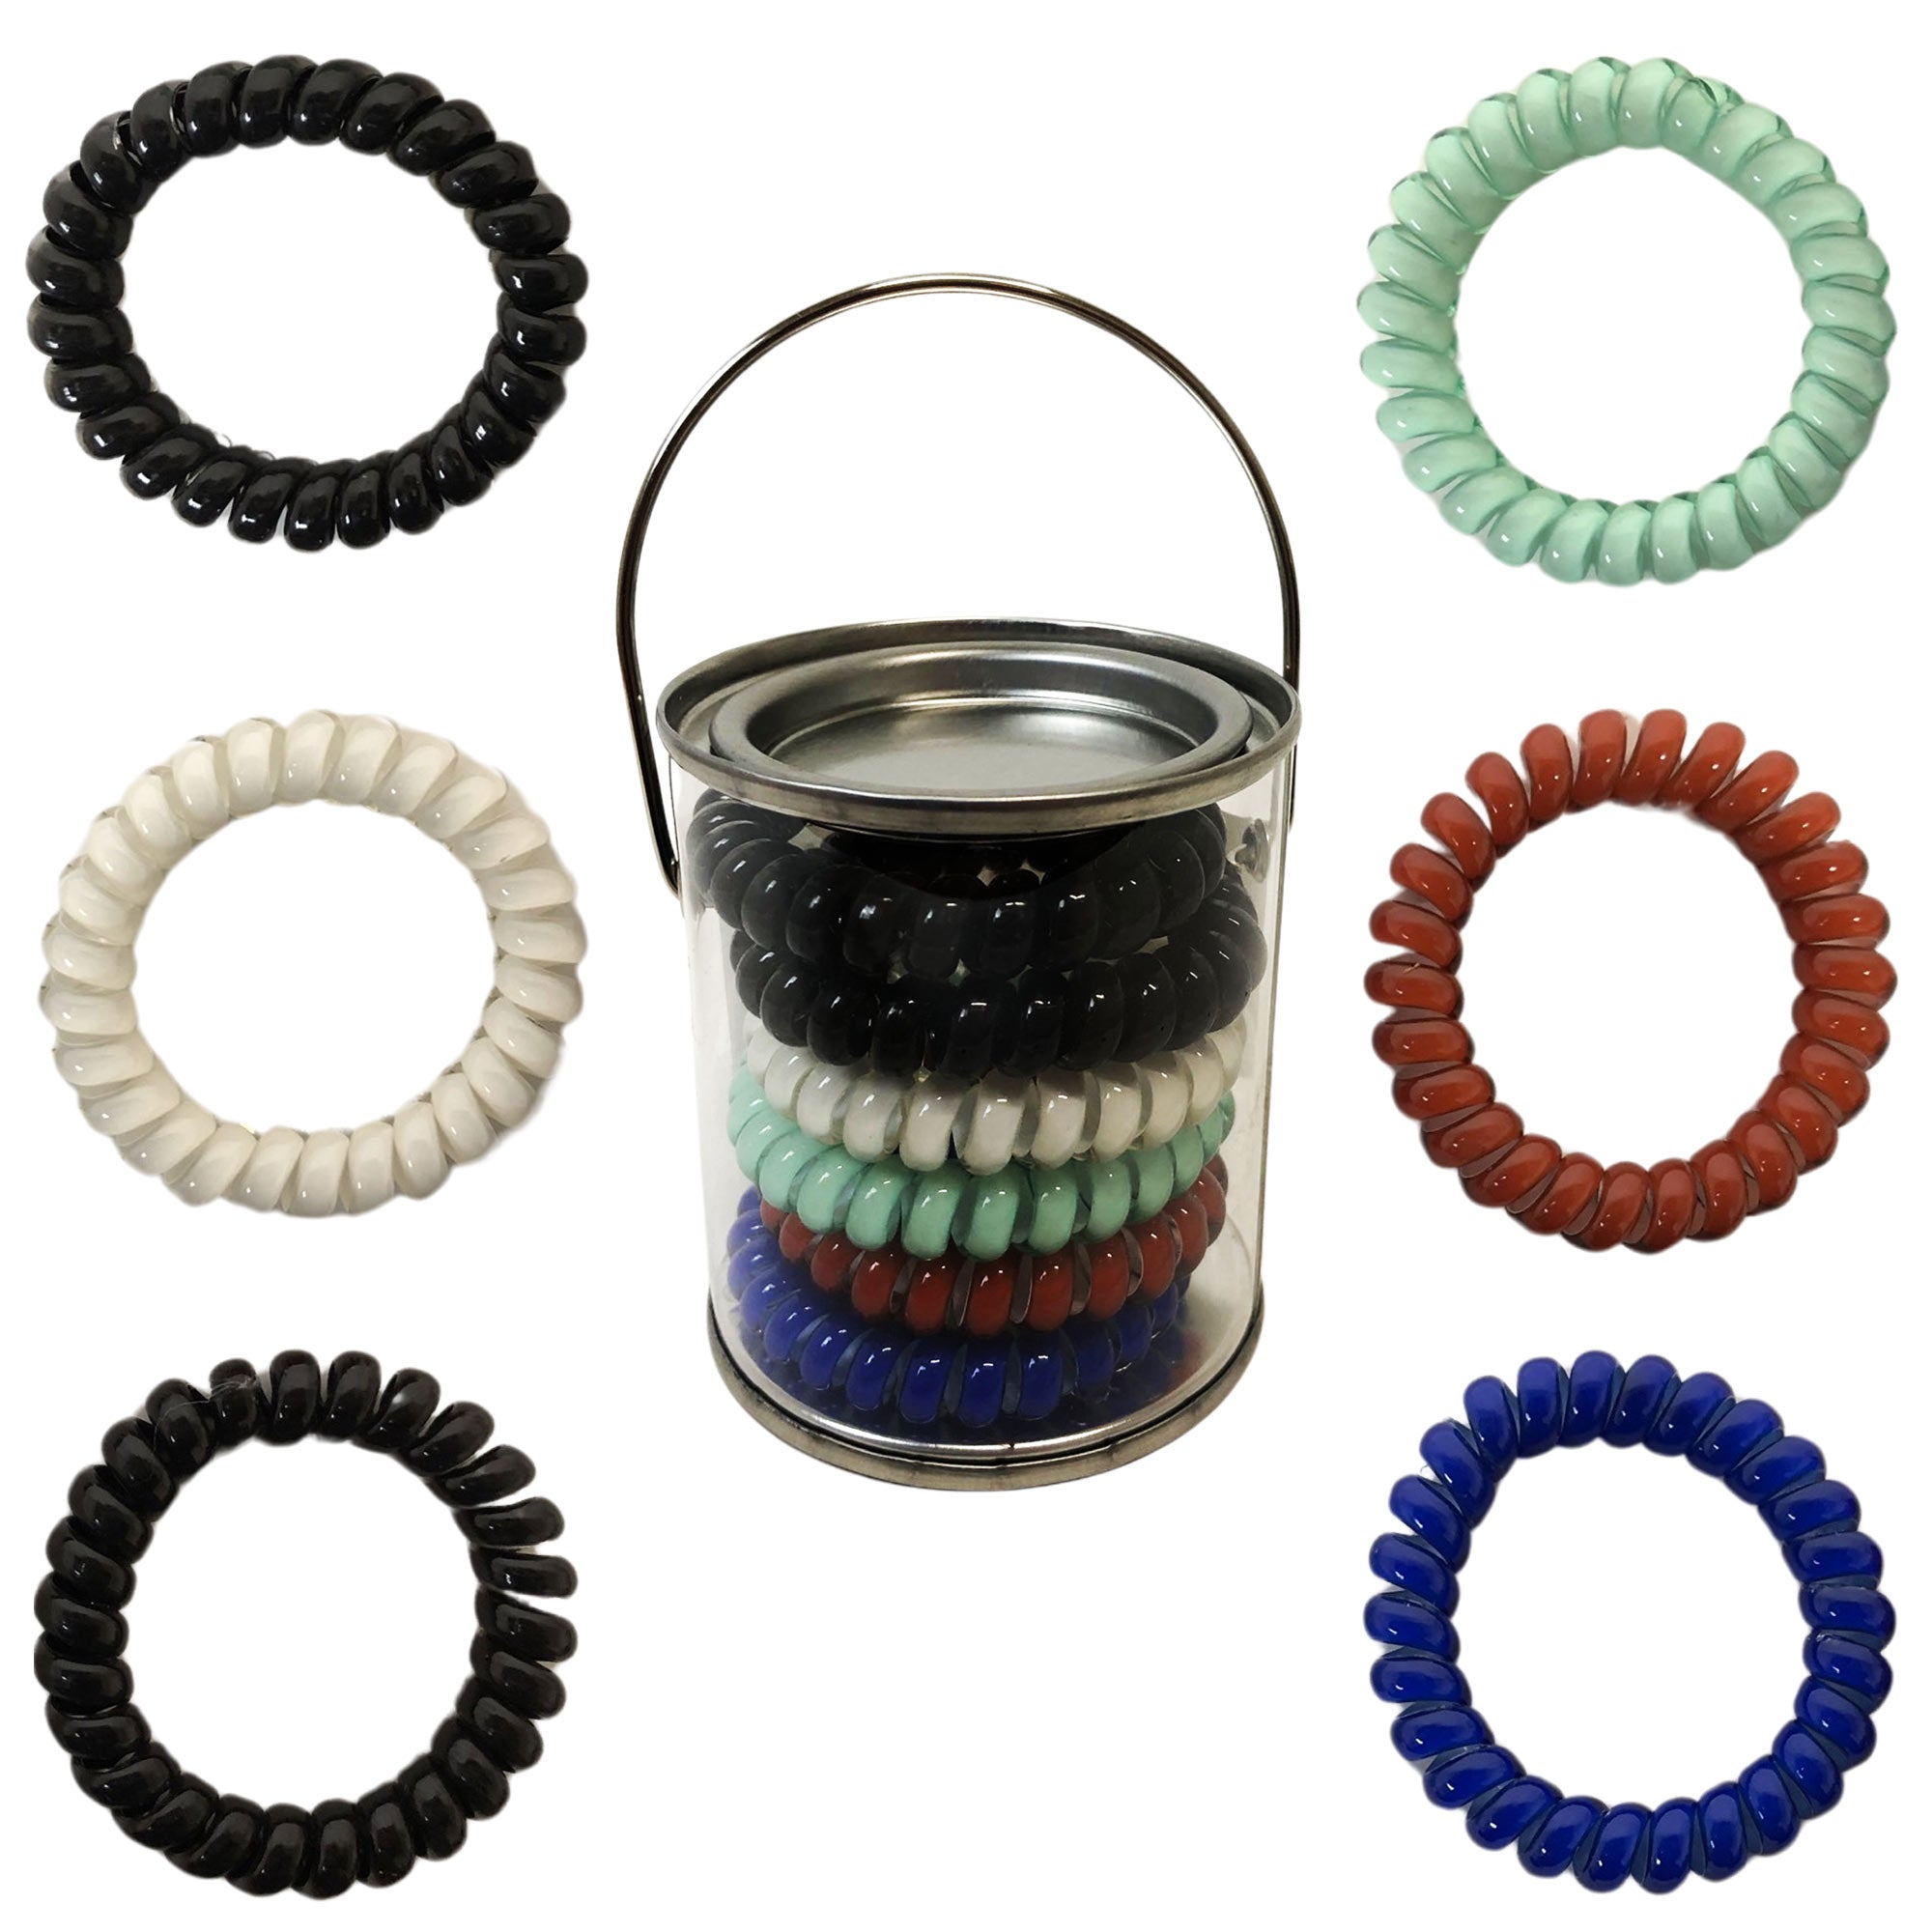 CLEARANCE CORDED HAIR TIES - 6 IN A CAN (CASE OF 36 - $2.00 / PIECE)  Wholesale Hair Ties in Assorted Colors SKU: 84112-36